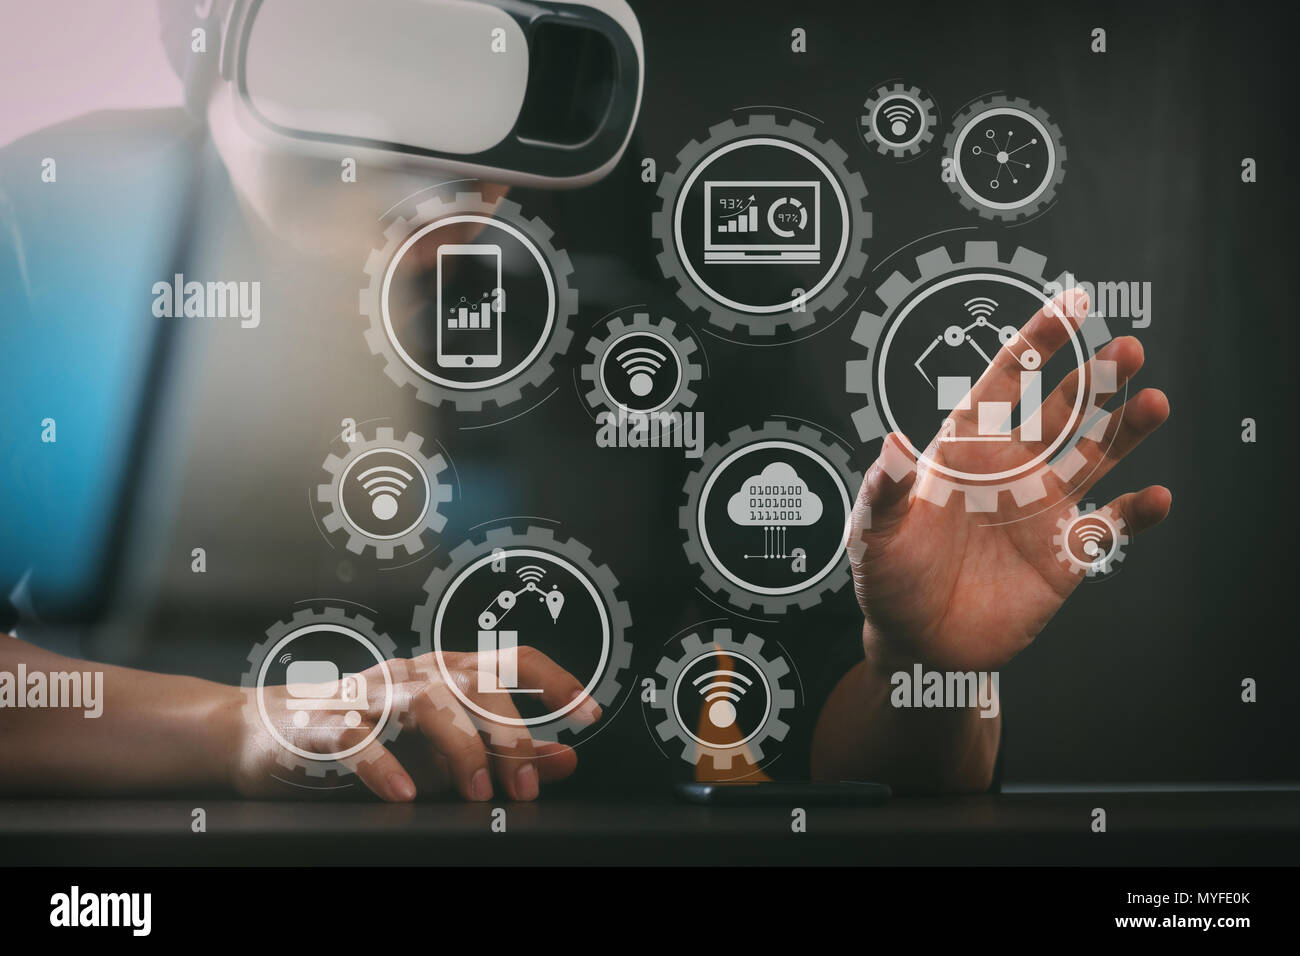 Smart factory and industry 4.0 and connected production robots exchanging data with internet of things (IoT) with cloud computing technology.businessm Stock Photo